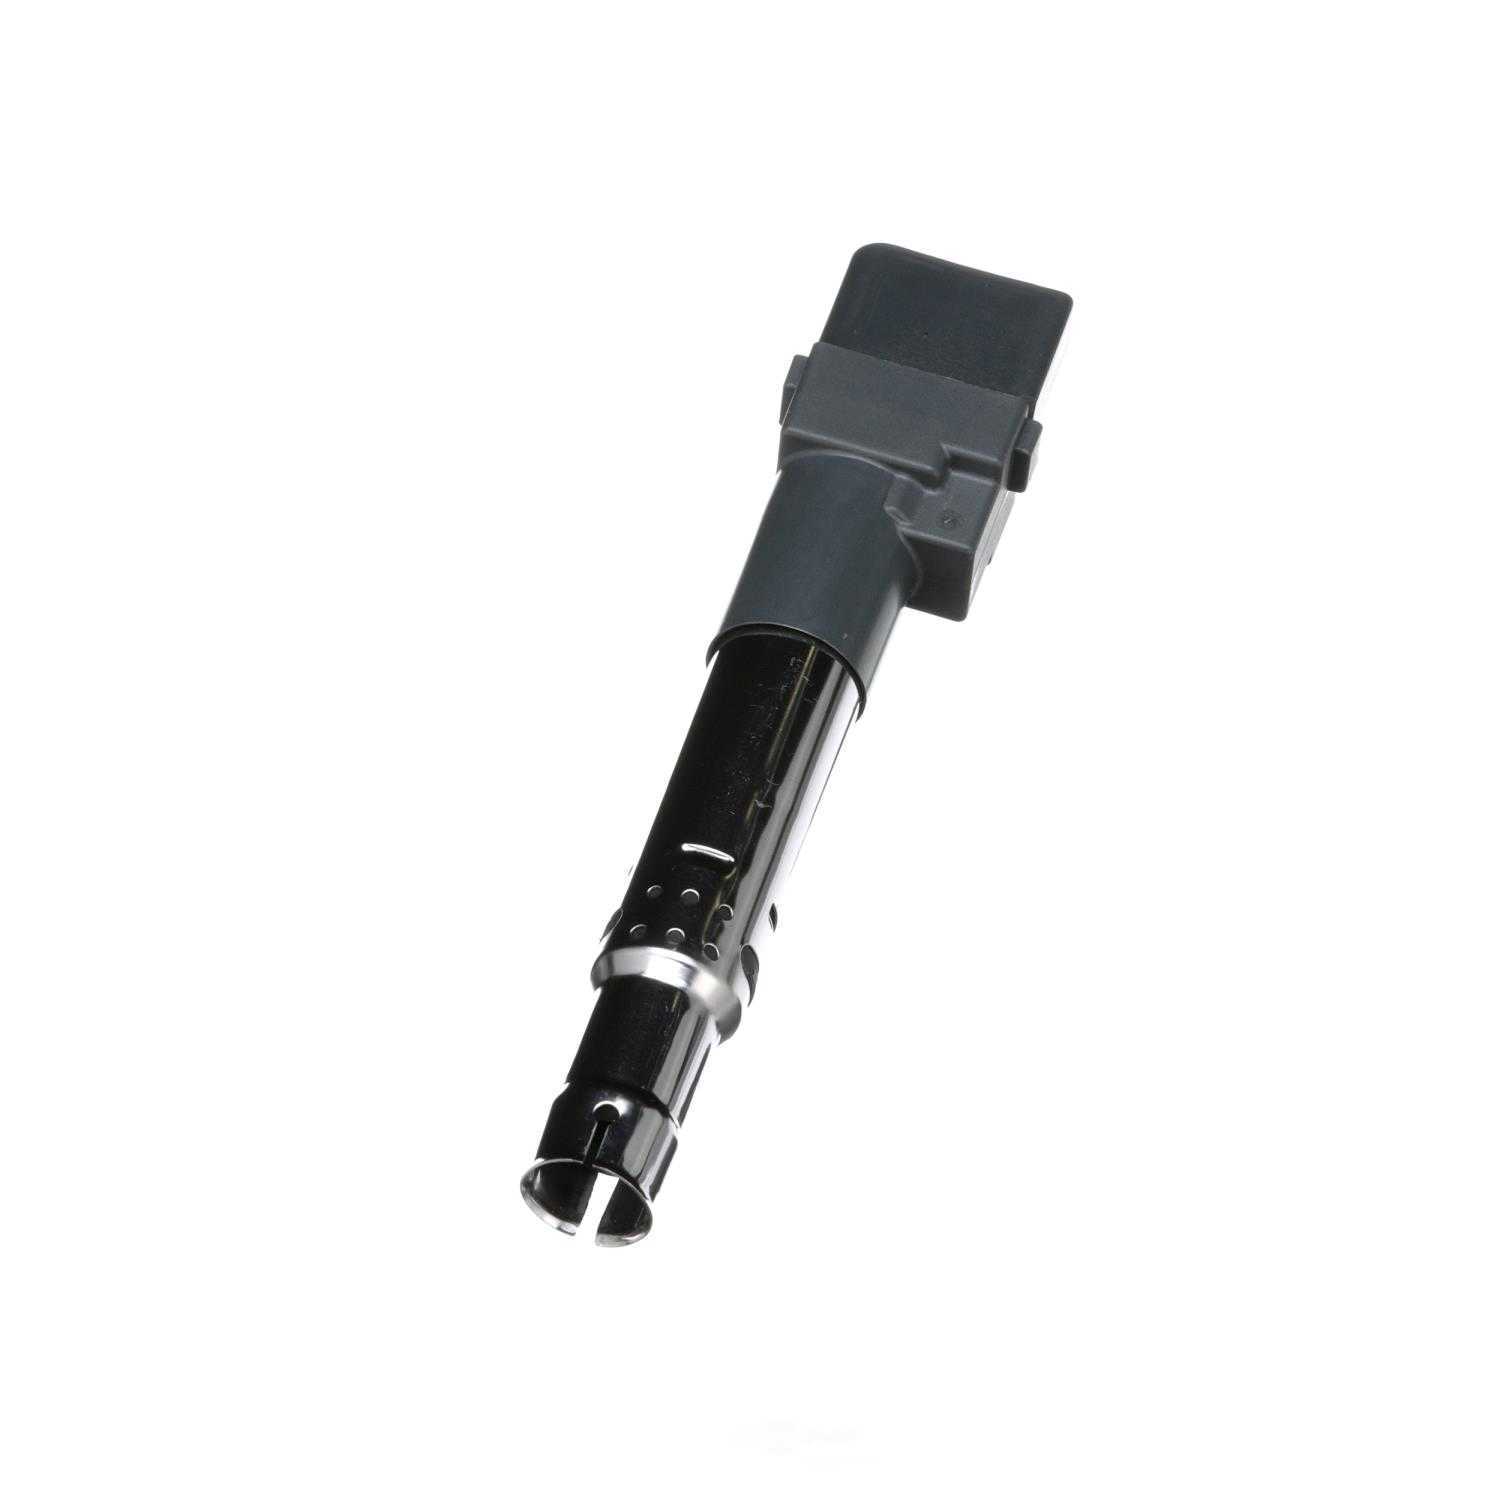 STANDARD MOTOR PRODUCTS - Ignition Coil - STA UF-616